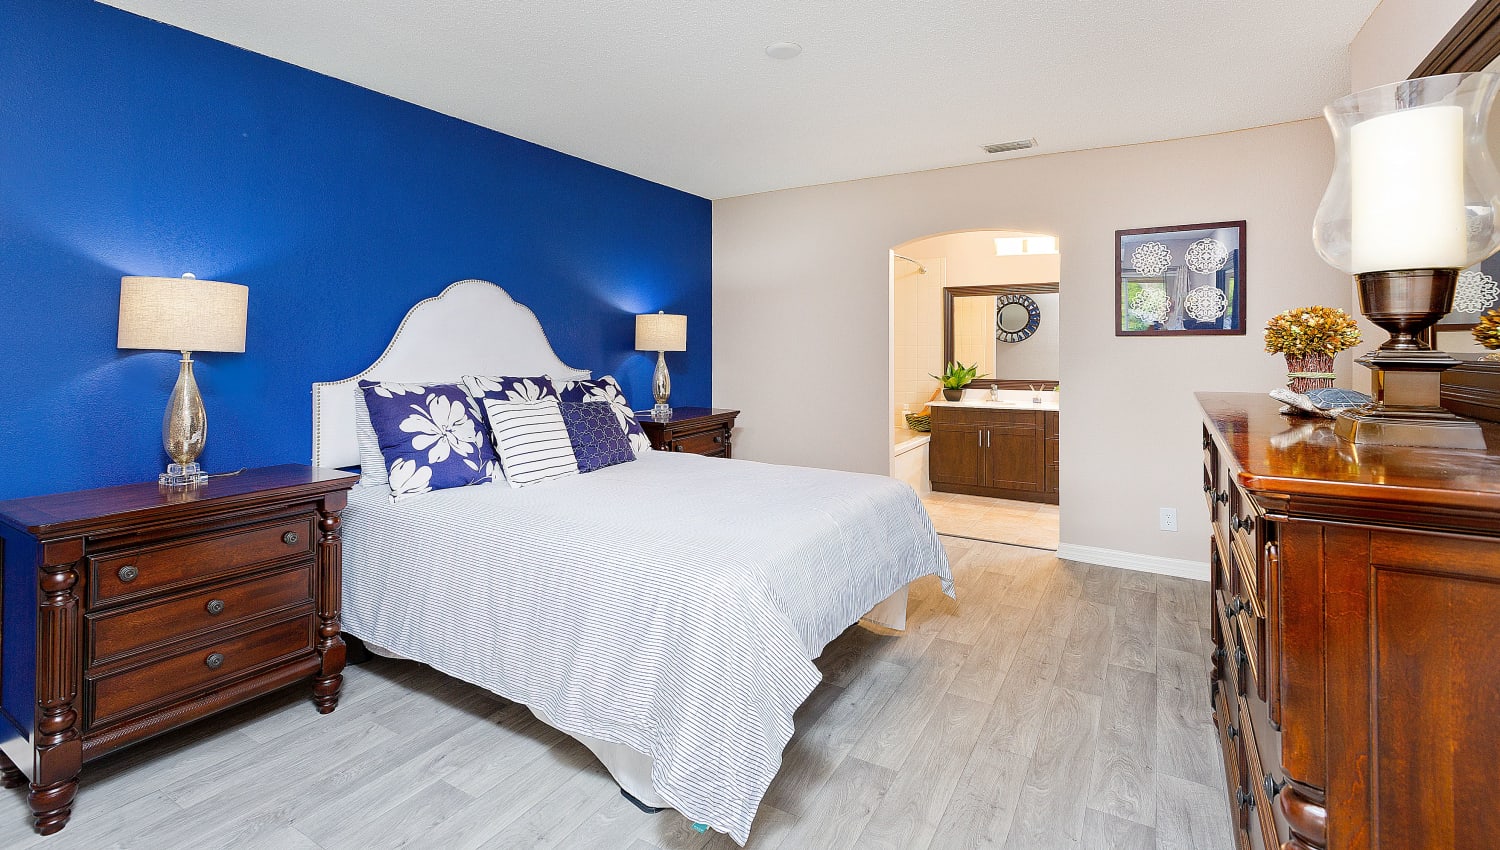 Primary bedroom with attached bathroom at Indian Hills Apartments in Boynton Beach, Florida